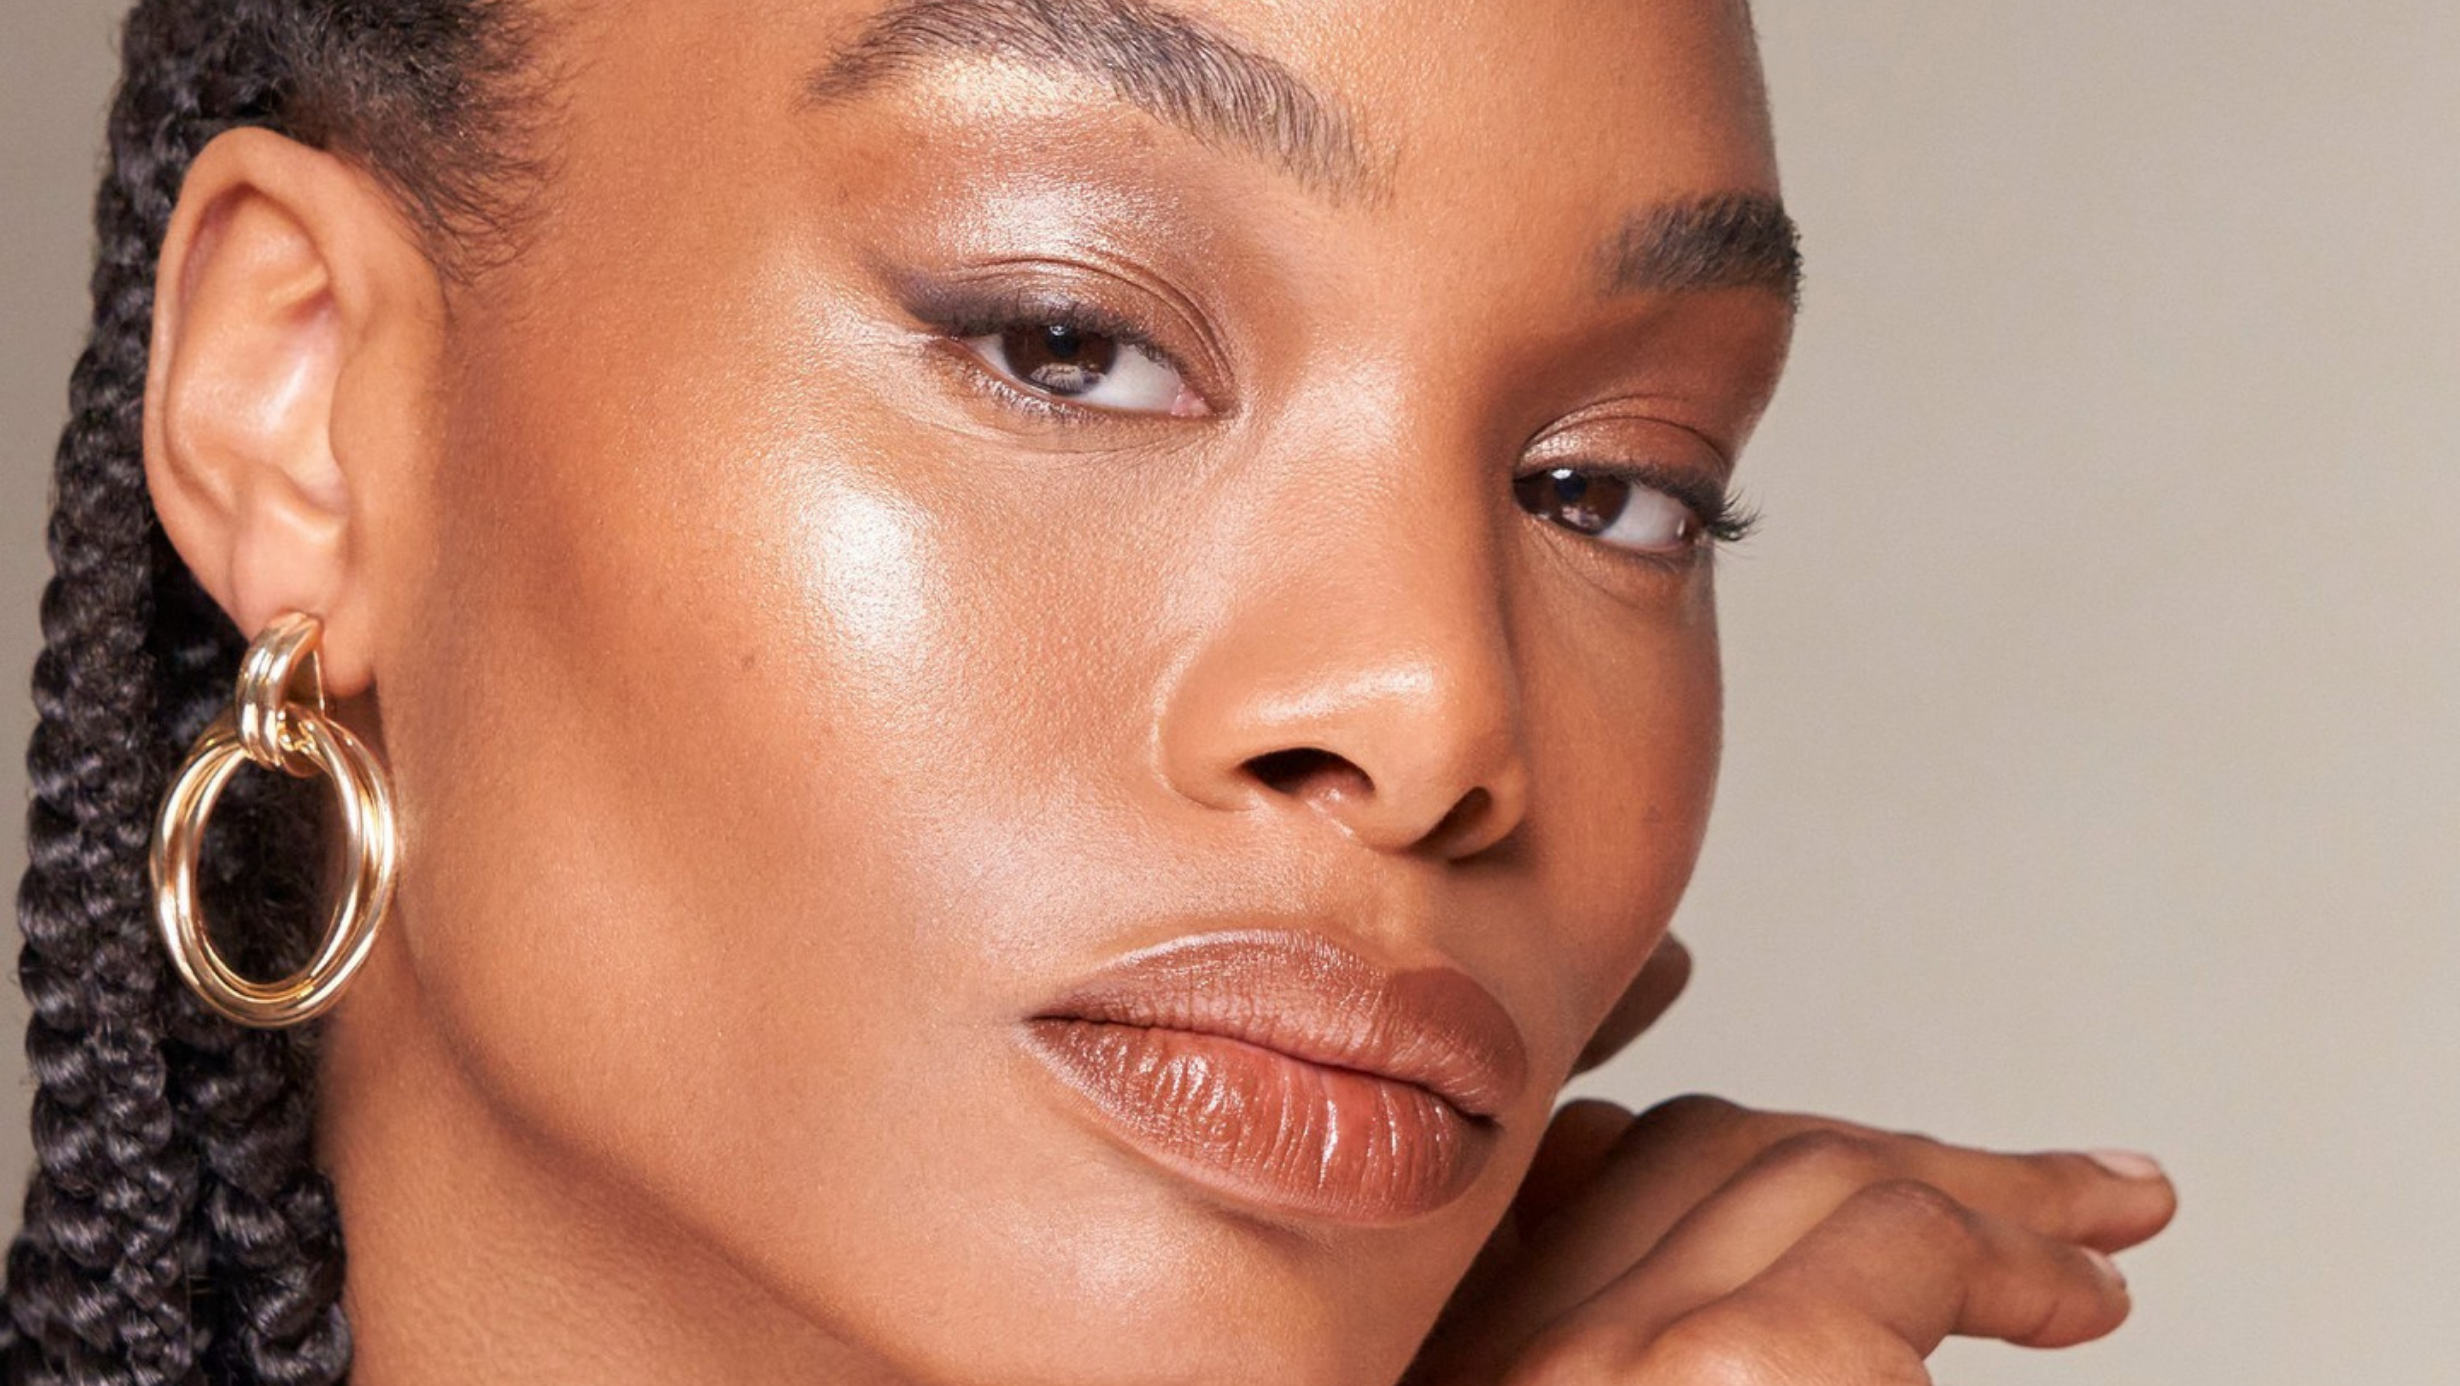 Try These Mattifying Setting Sprays You Have If You Have Oily Skin